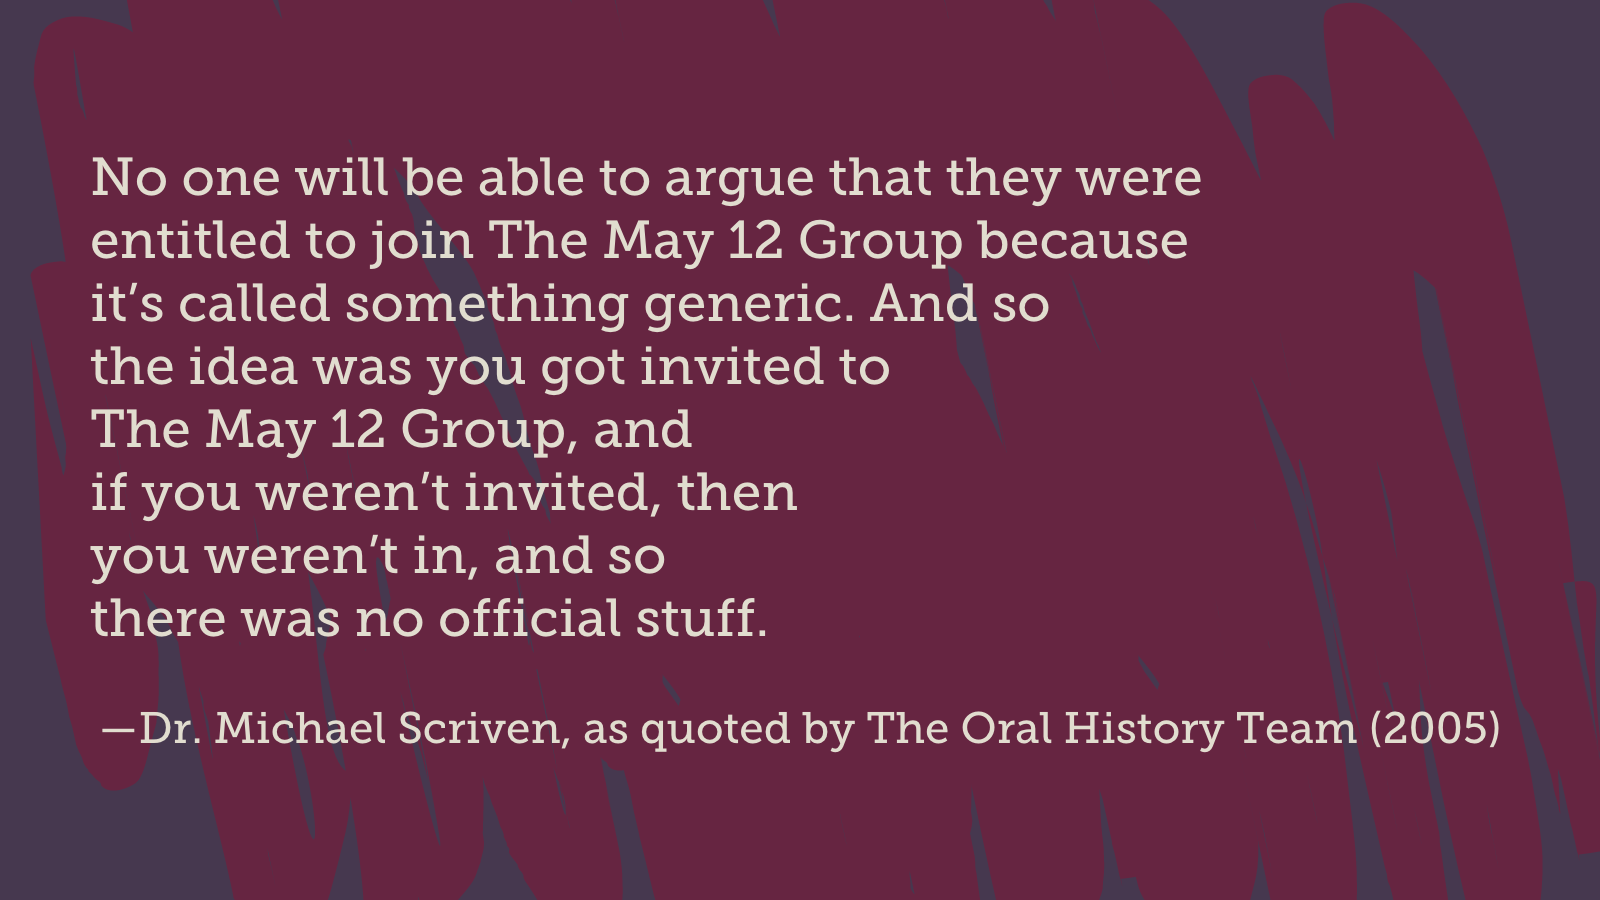 Dr. Michael Scriven, as quoted by The Oral History Team (2005), said "No one will be able to argue that they were entitled to join The May 12 Group because
it’s called something generic. And so the idea was you got invited to The May 12 Group, and if you weren’t invited, then you weren’t in, and so there was no official stuff."